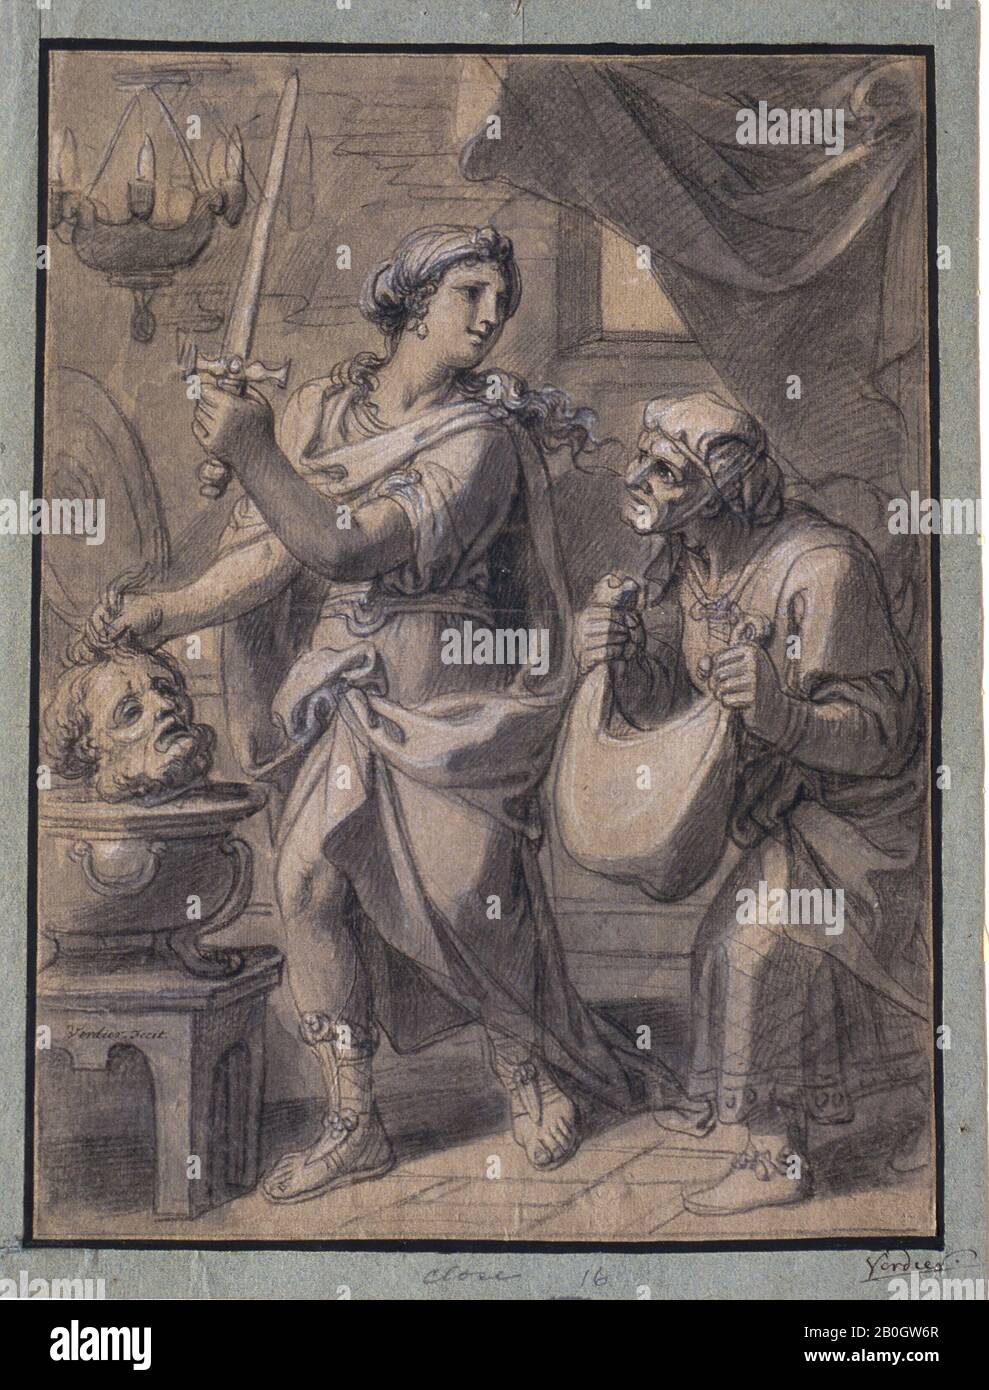 François Verdier, French, 1651–1730, Judith and Her Servant with the Head of Holofernes, 1661–1730, Black chalk with white heightenings and gray wash on paper, affixed to sheet of laid paper with old blue border, Overall: 13 1/4 x 9 15/16 in. (33.6 x 25.2 cm Stock Photo